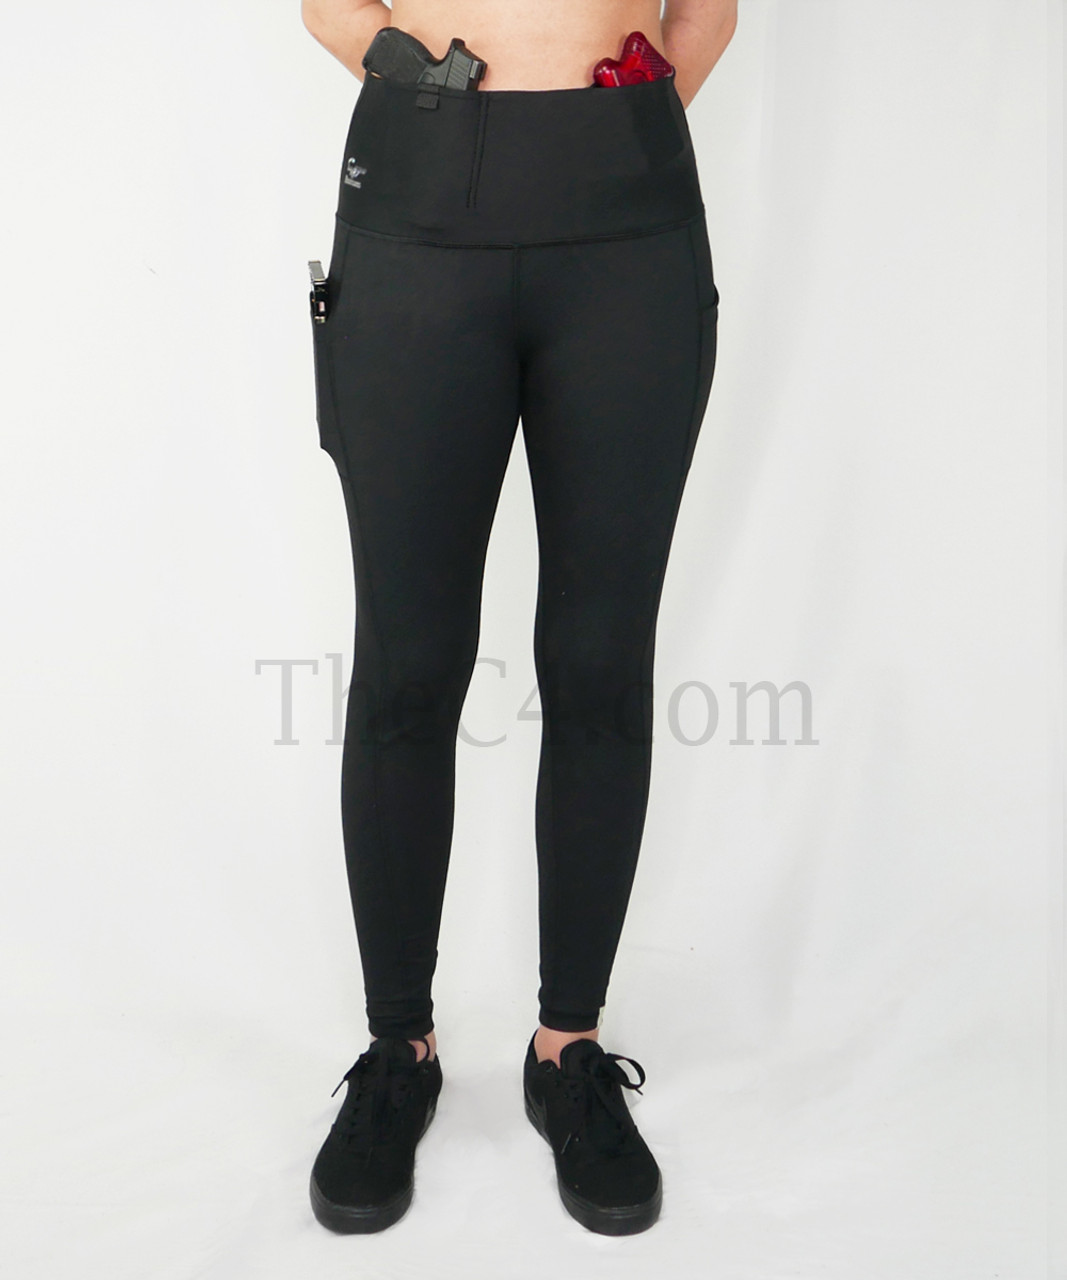 Concealed Carry Leggings With Tactical Pockets, Black